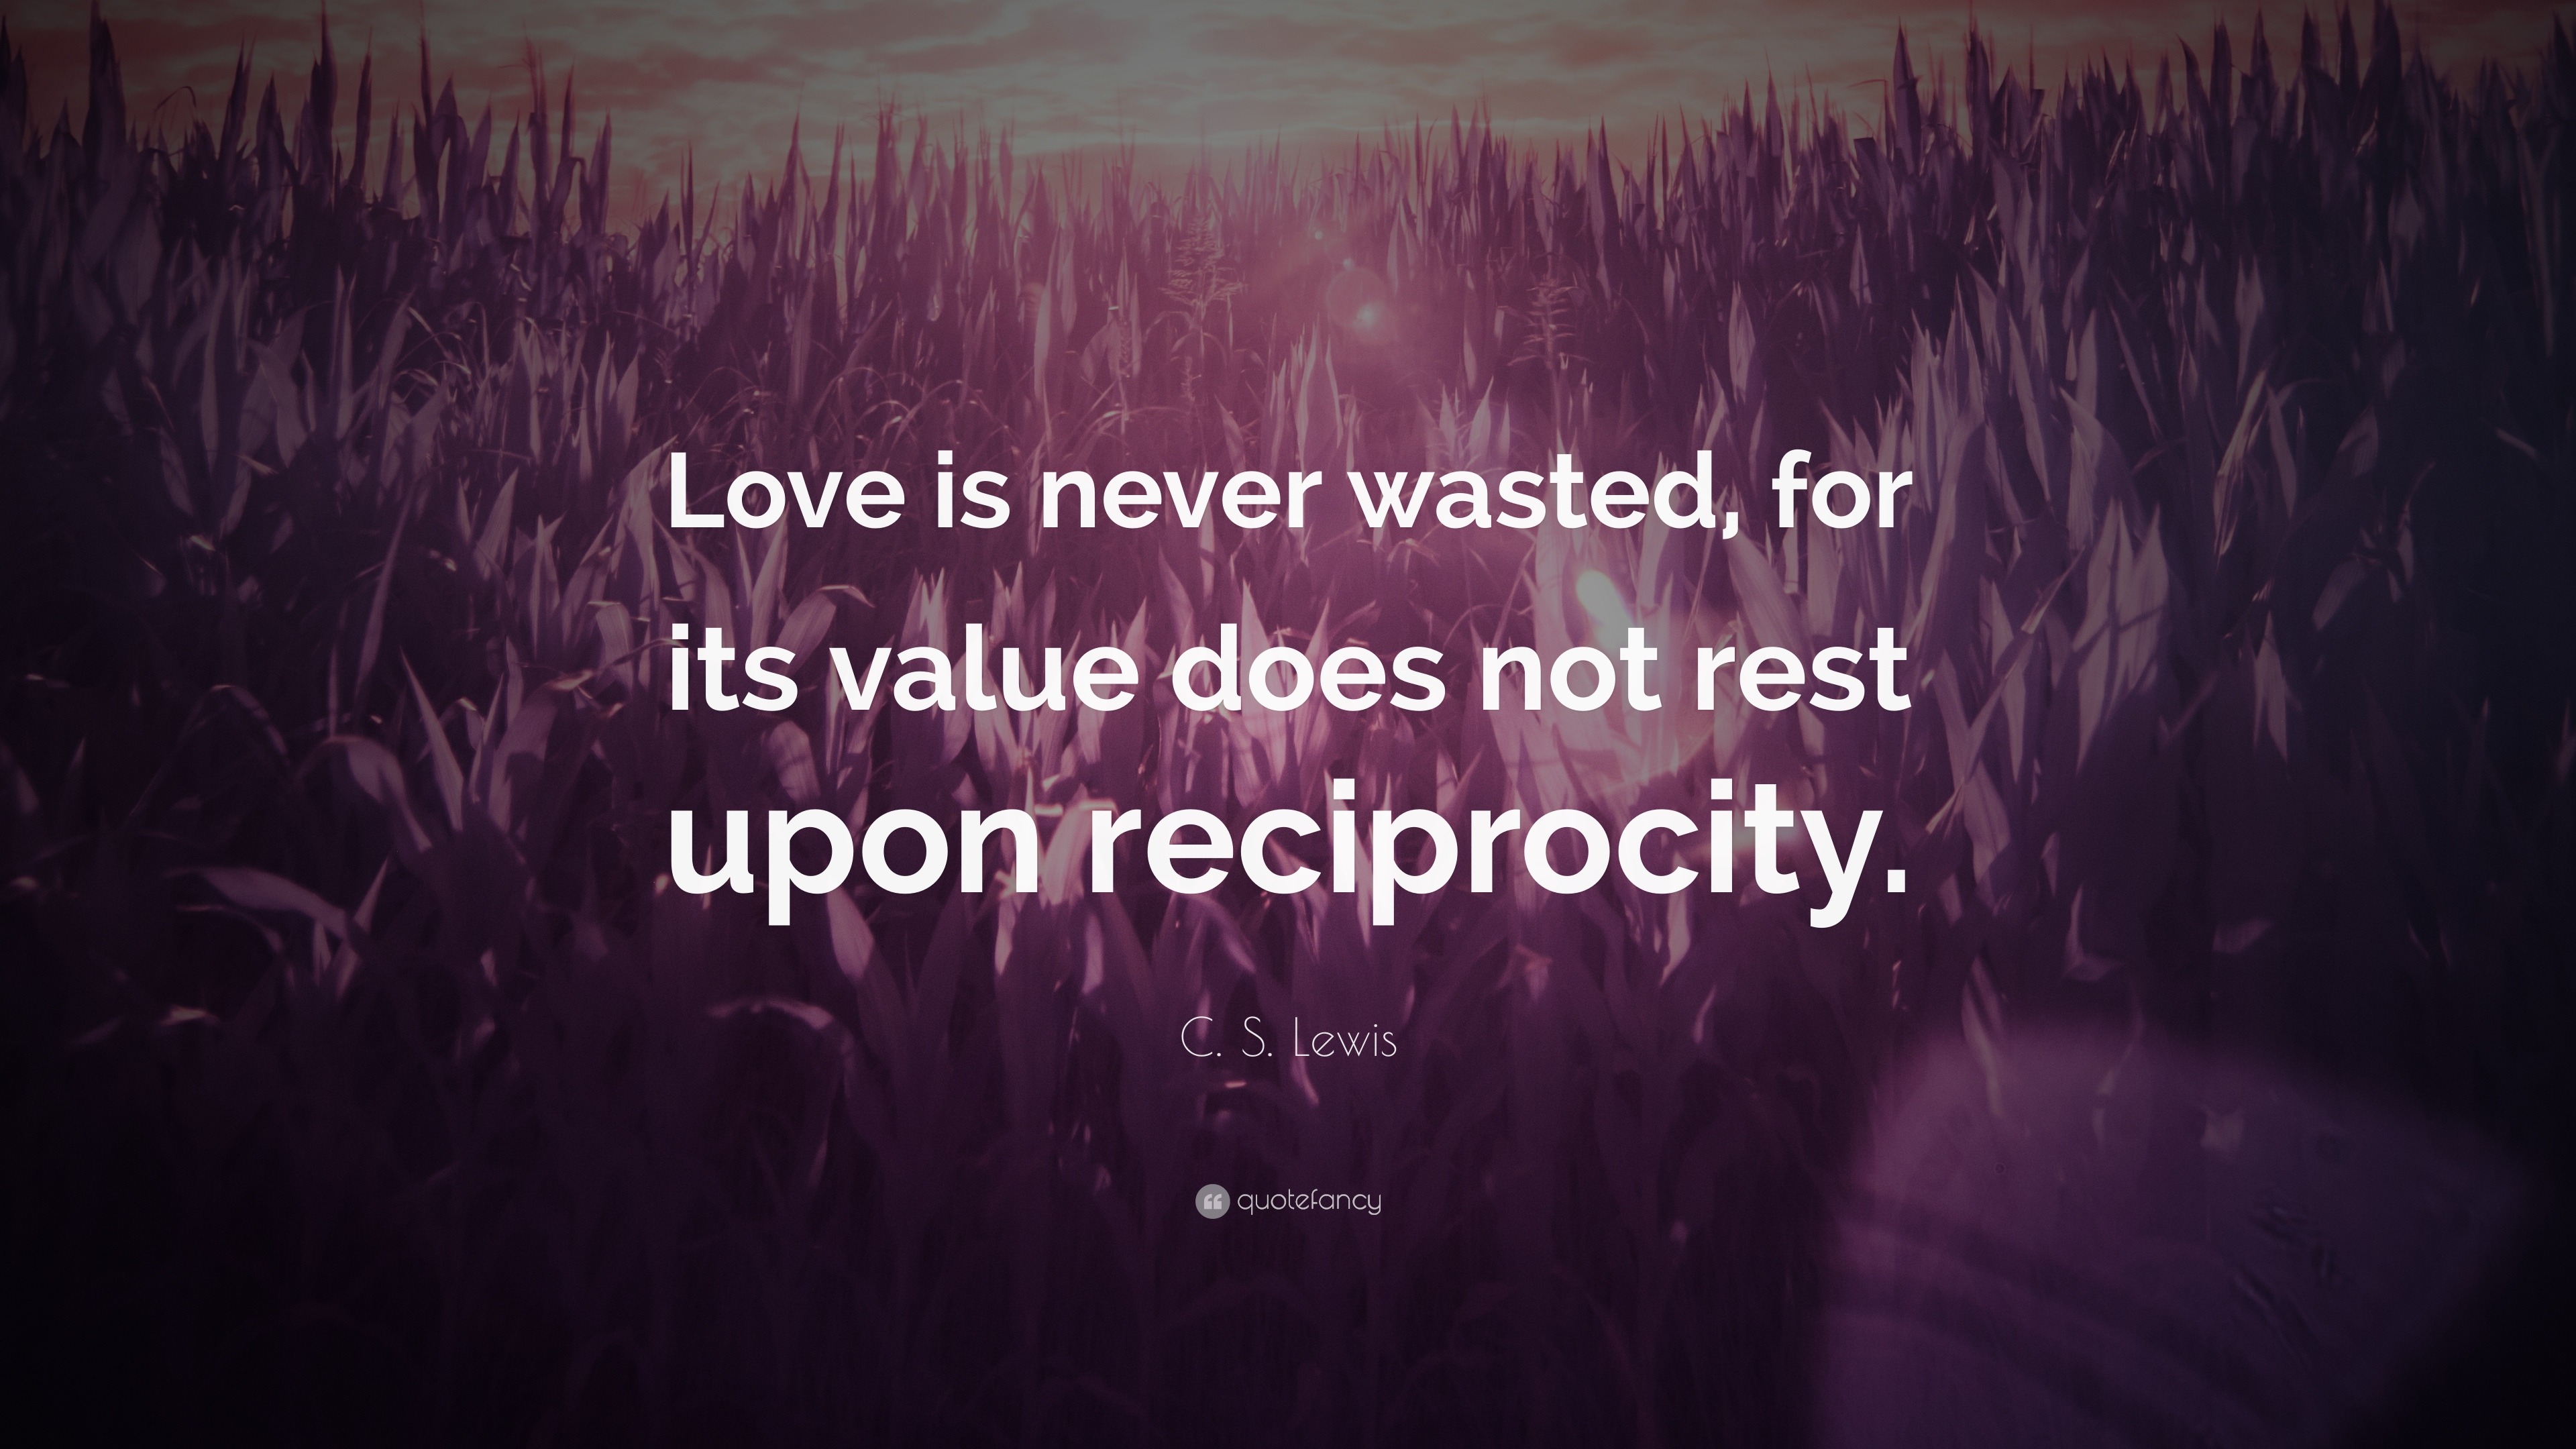 C. S. Lewis Quote: “Love is never wasted, for its value does not rest